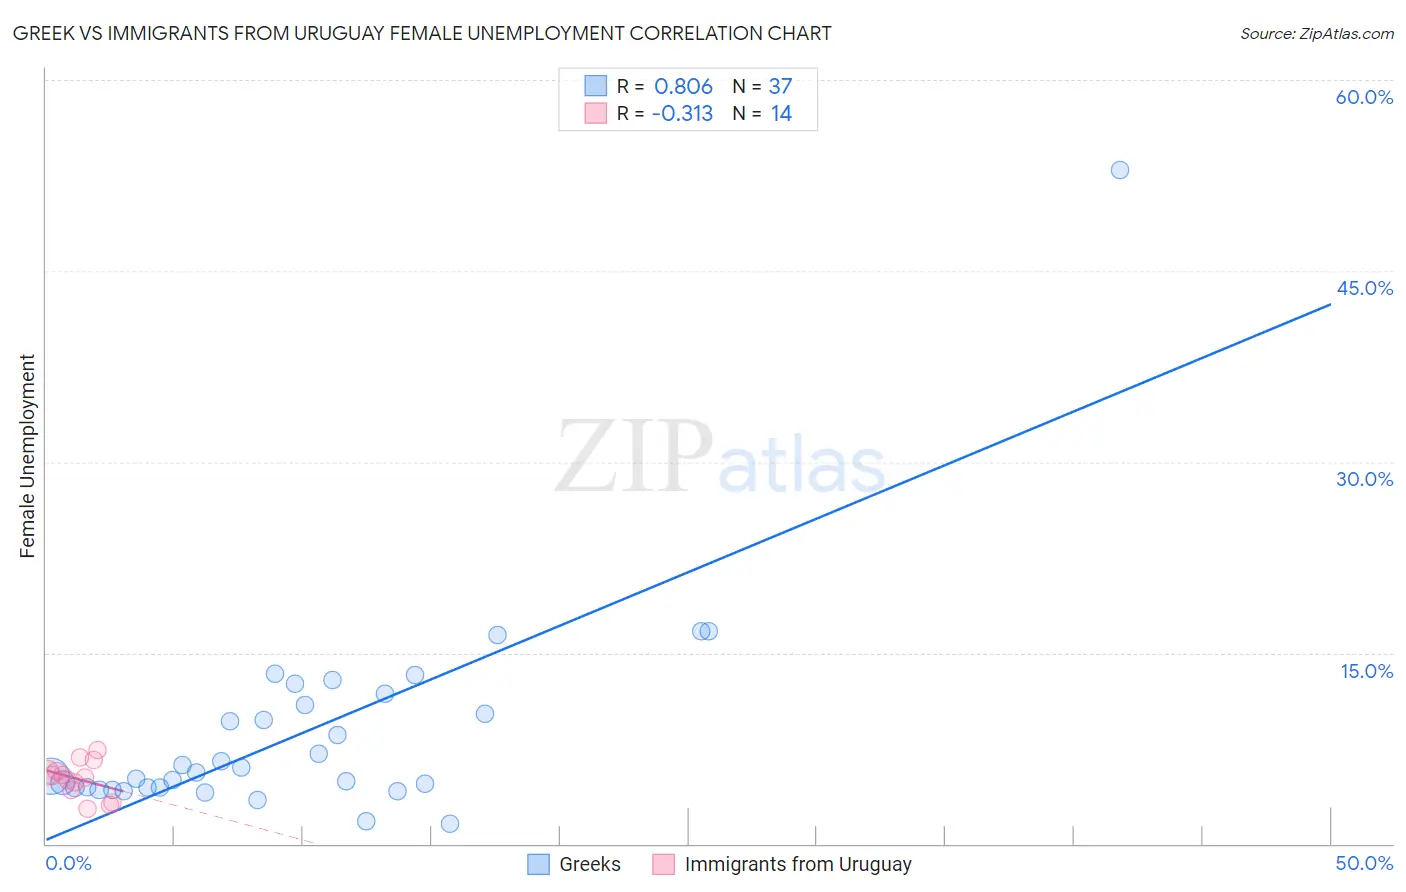 Greek vs Immigrants from Uruguay Female Unemployment